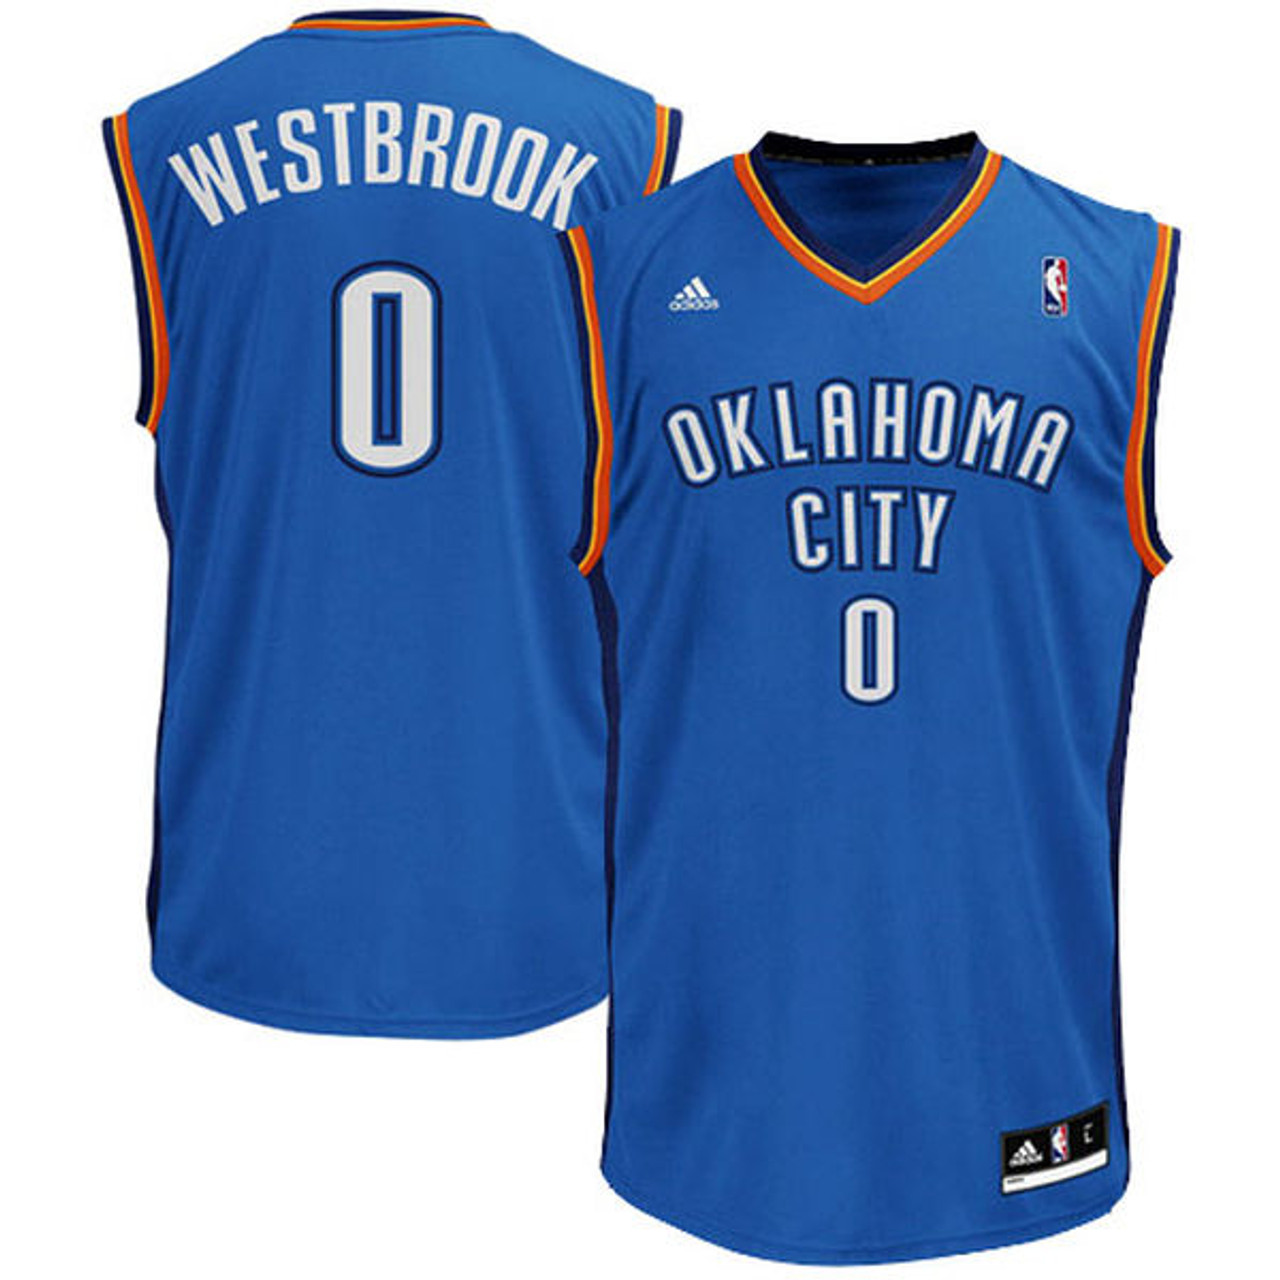 westbrook youth jersey